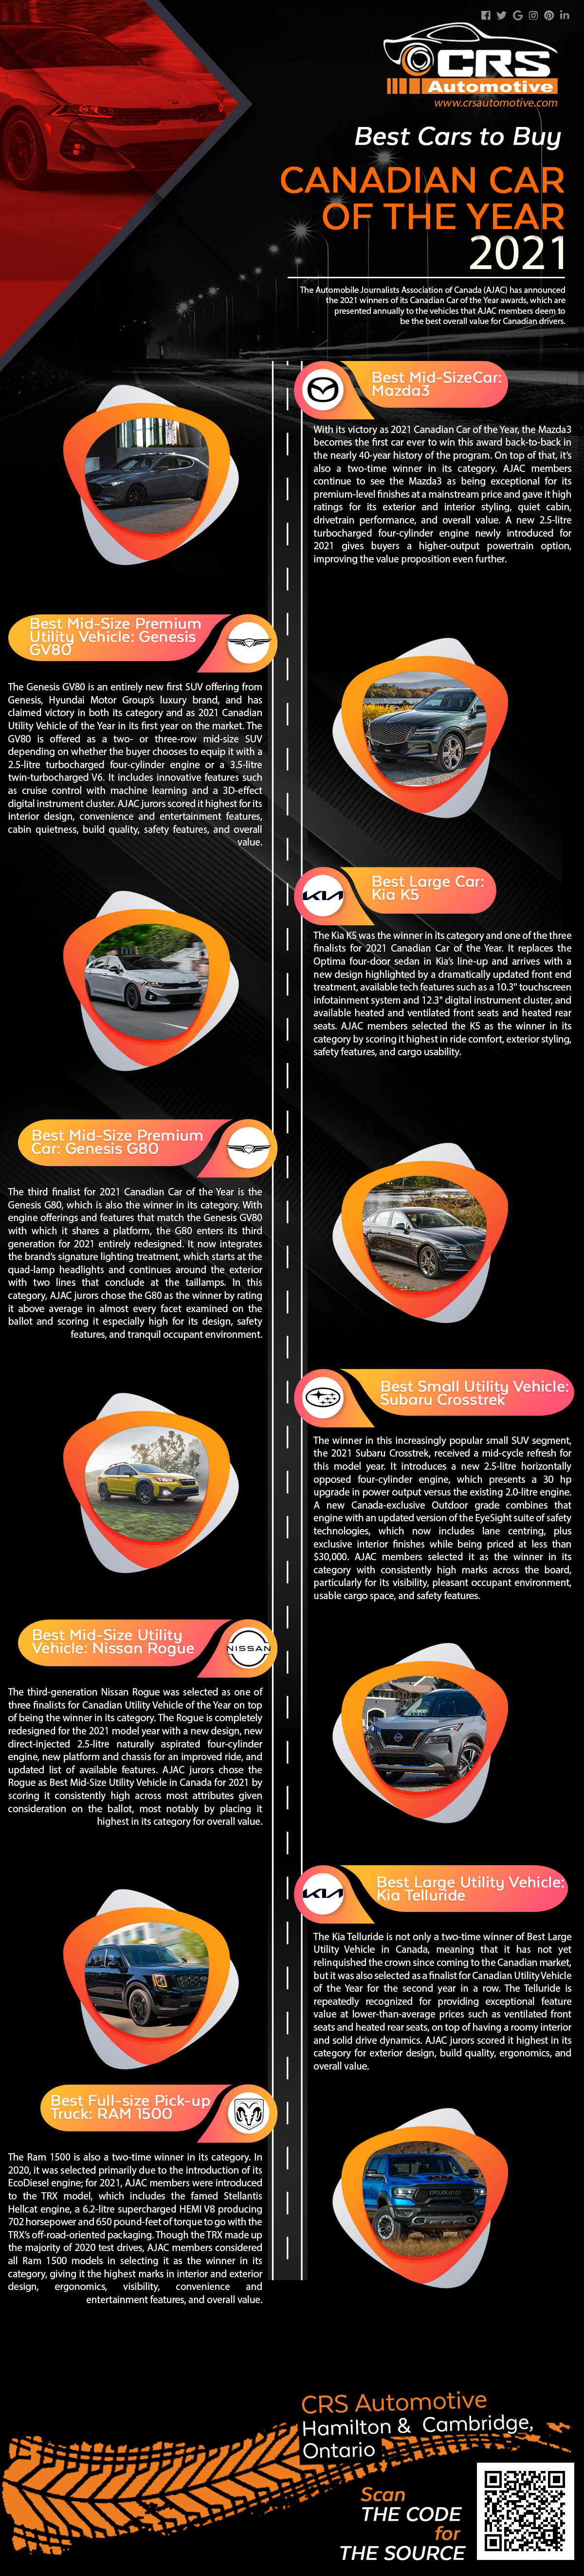 Best Cars to Buy Canadian Car of 2021 Infographic